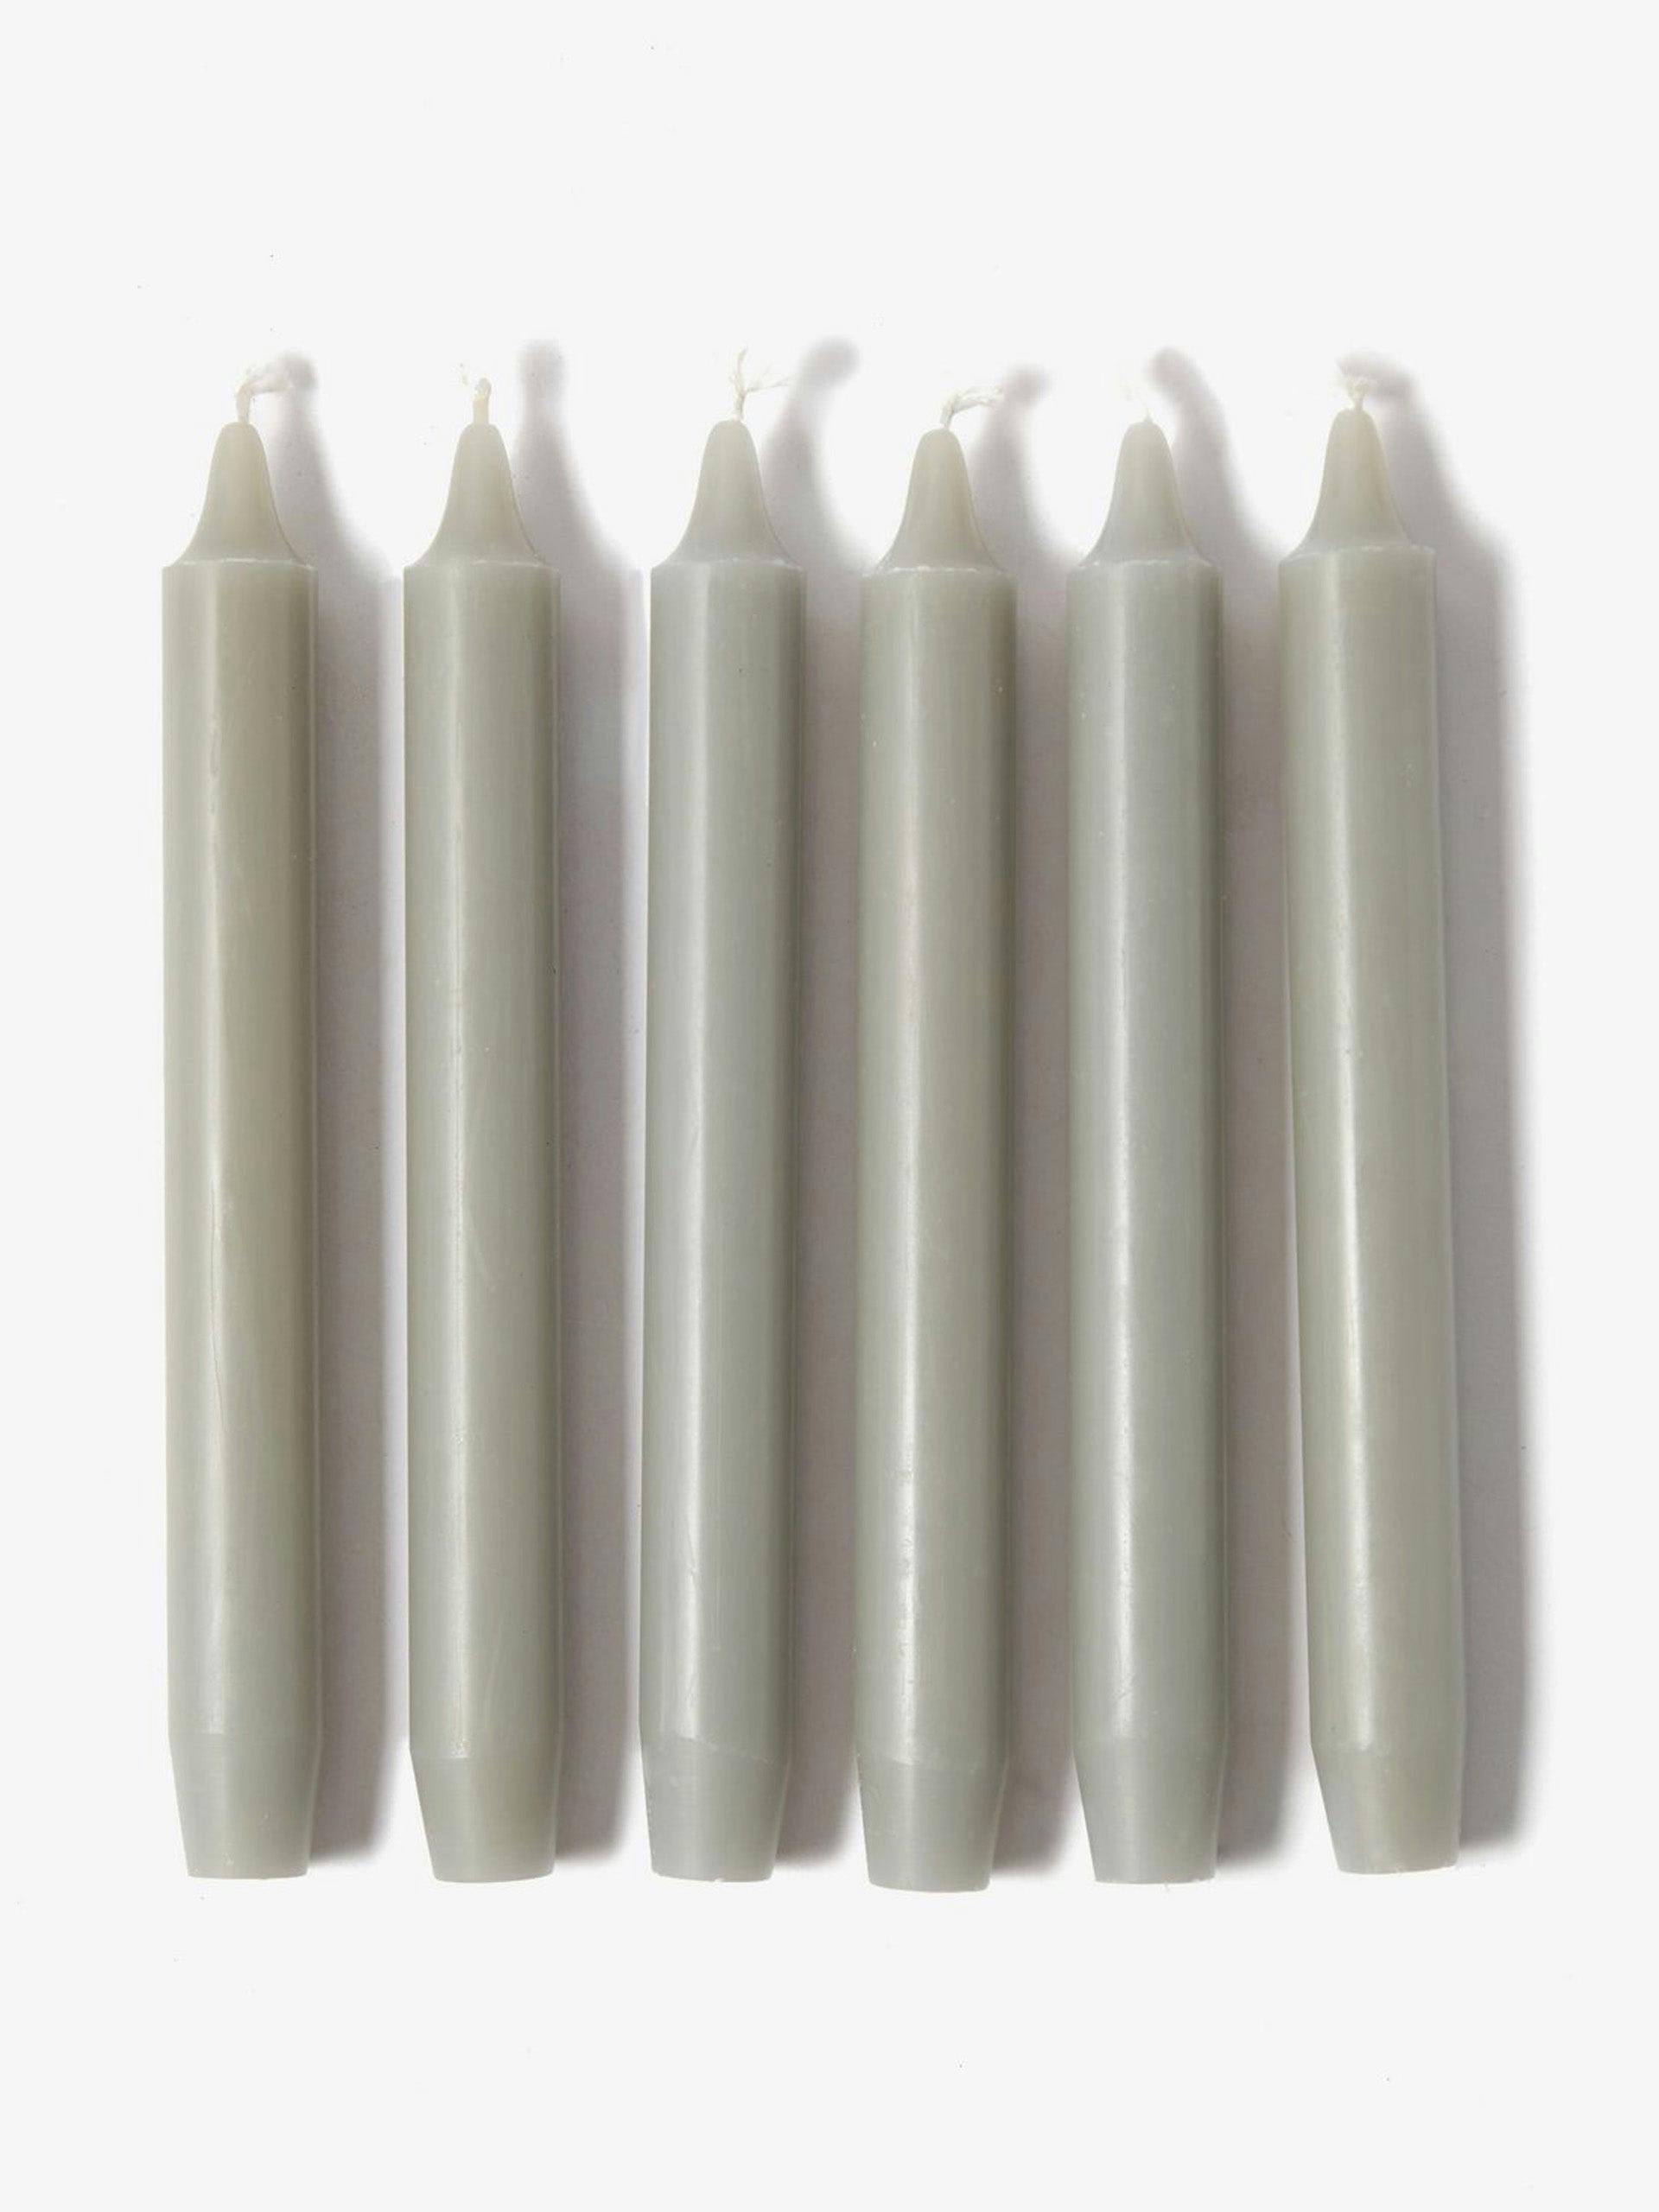 Madeleine tapered grey candles (set of 6)